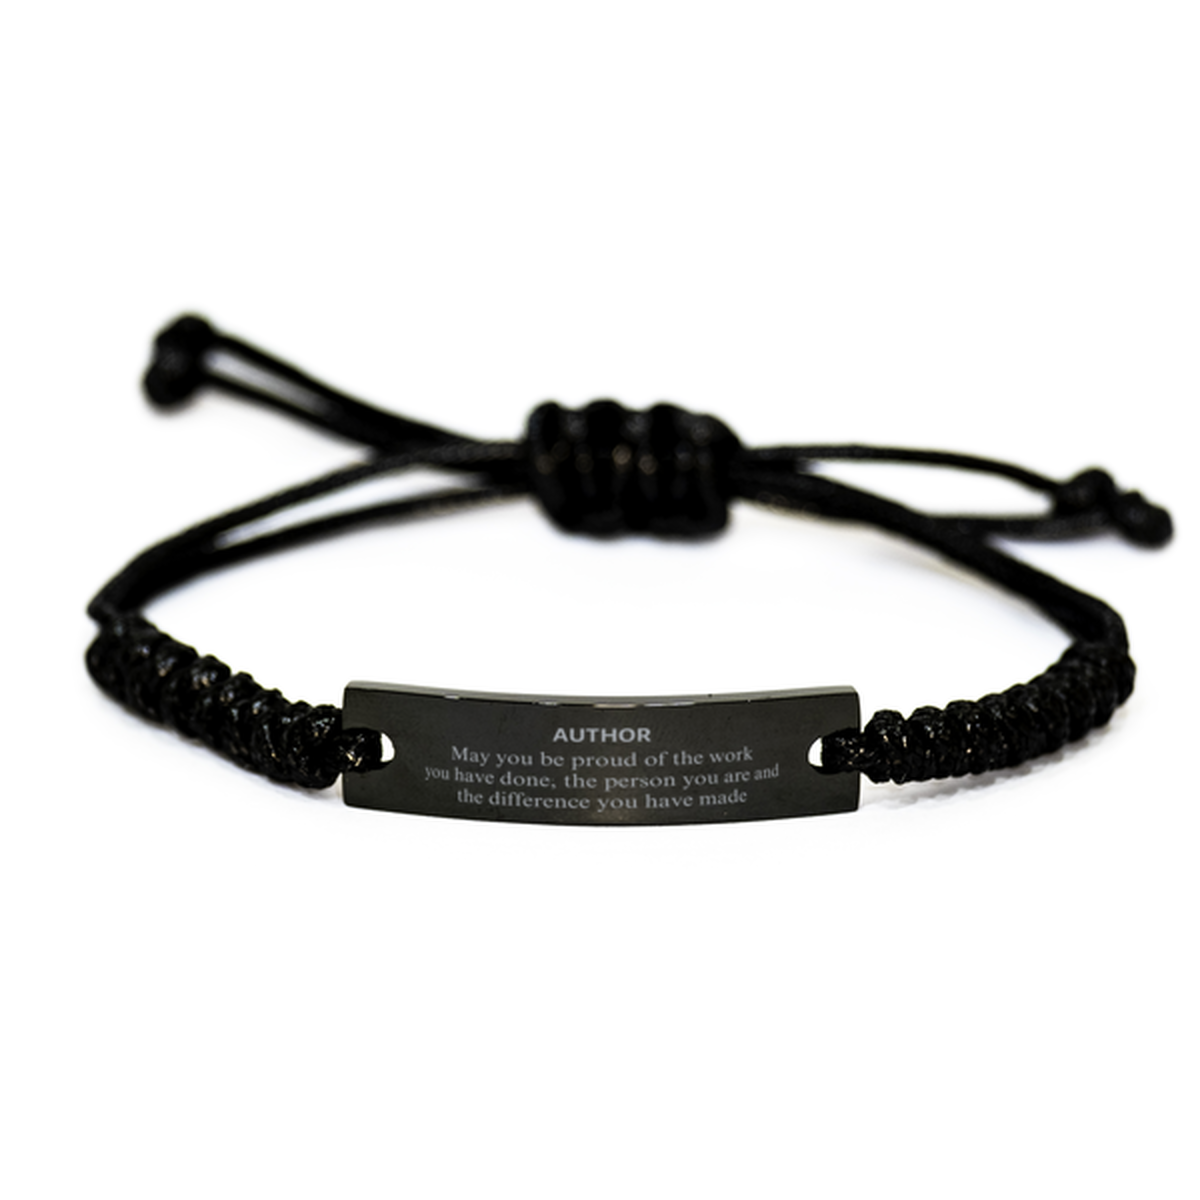 Author May you be proud of the work you have done, Retirement Author Black Rope Bracelet for Colleague Appreciation Gifts Amazing for Author